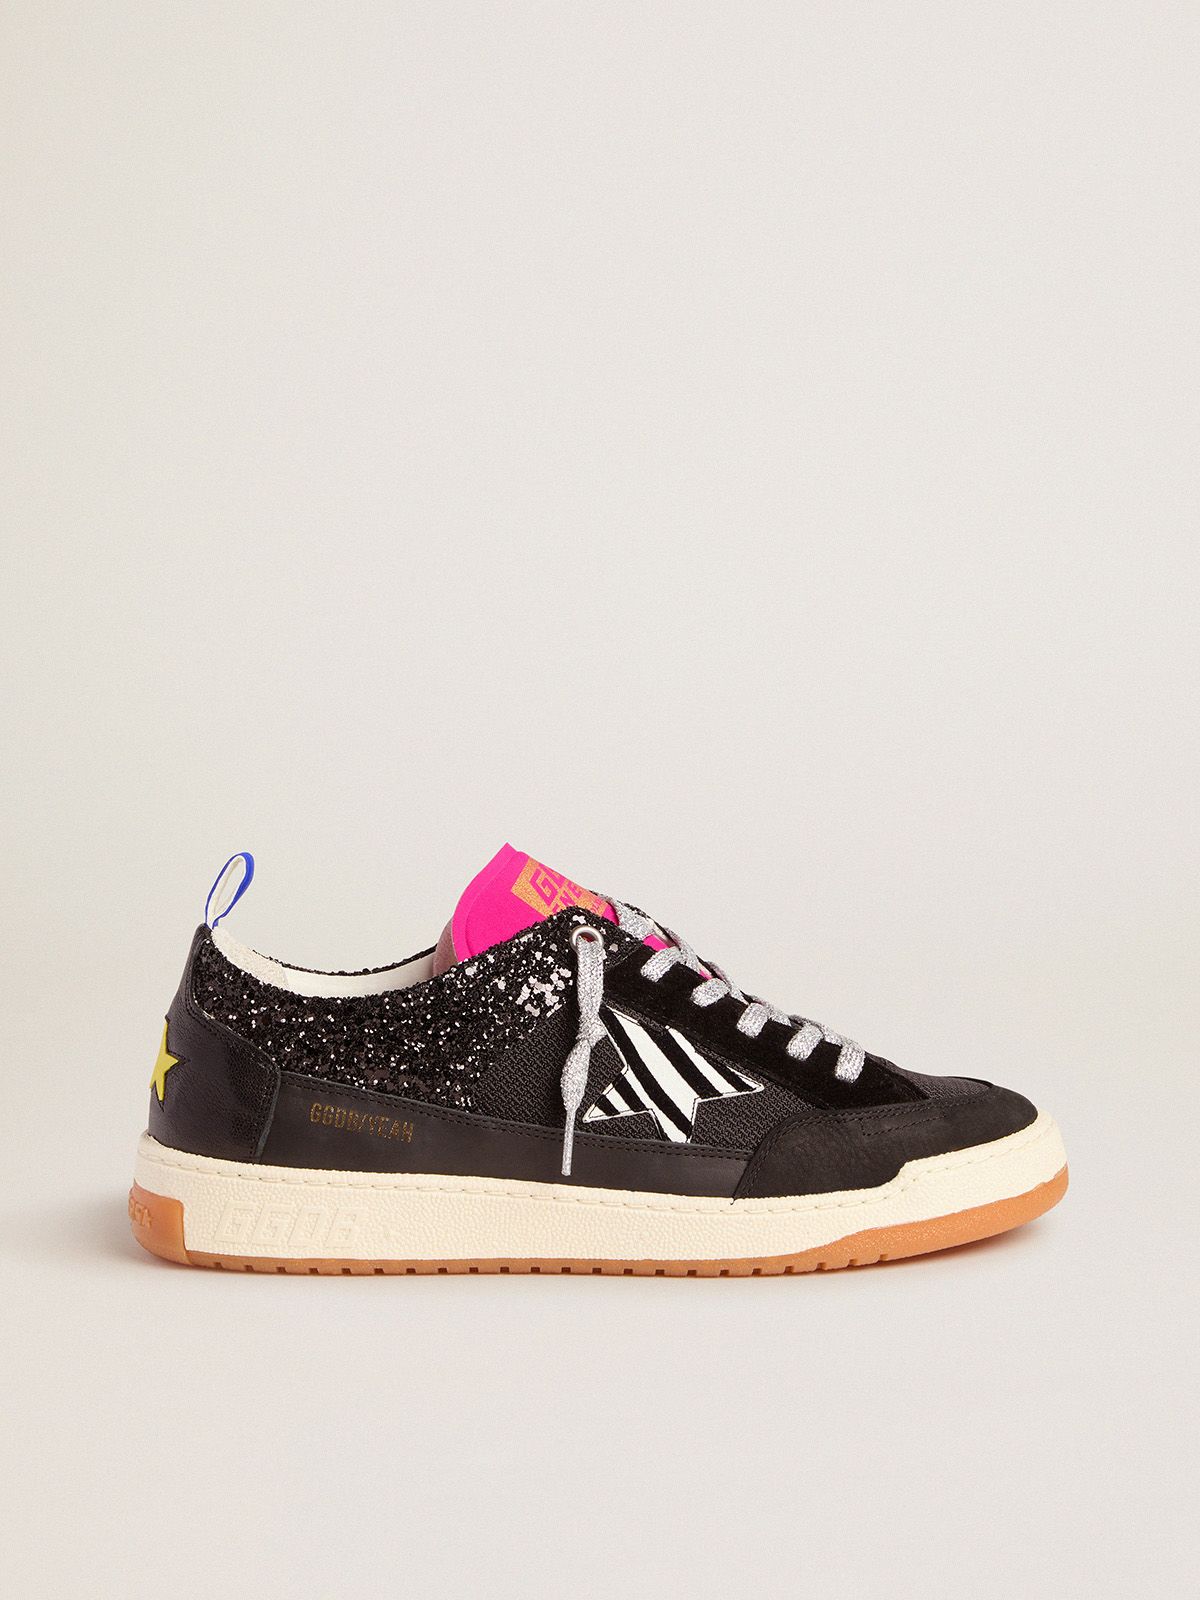 Men’s black Yeah sneakers with glitter and zebra-print star